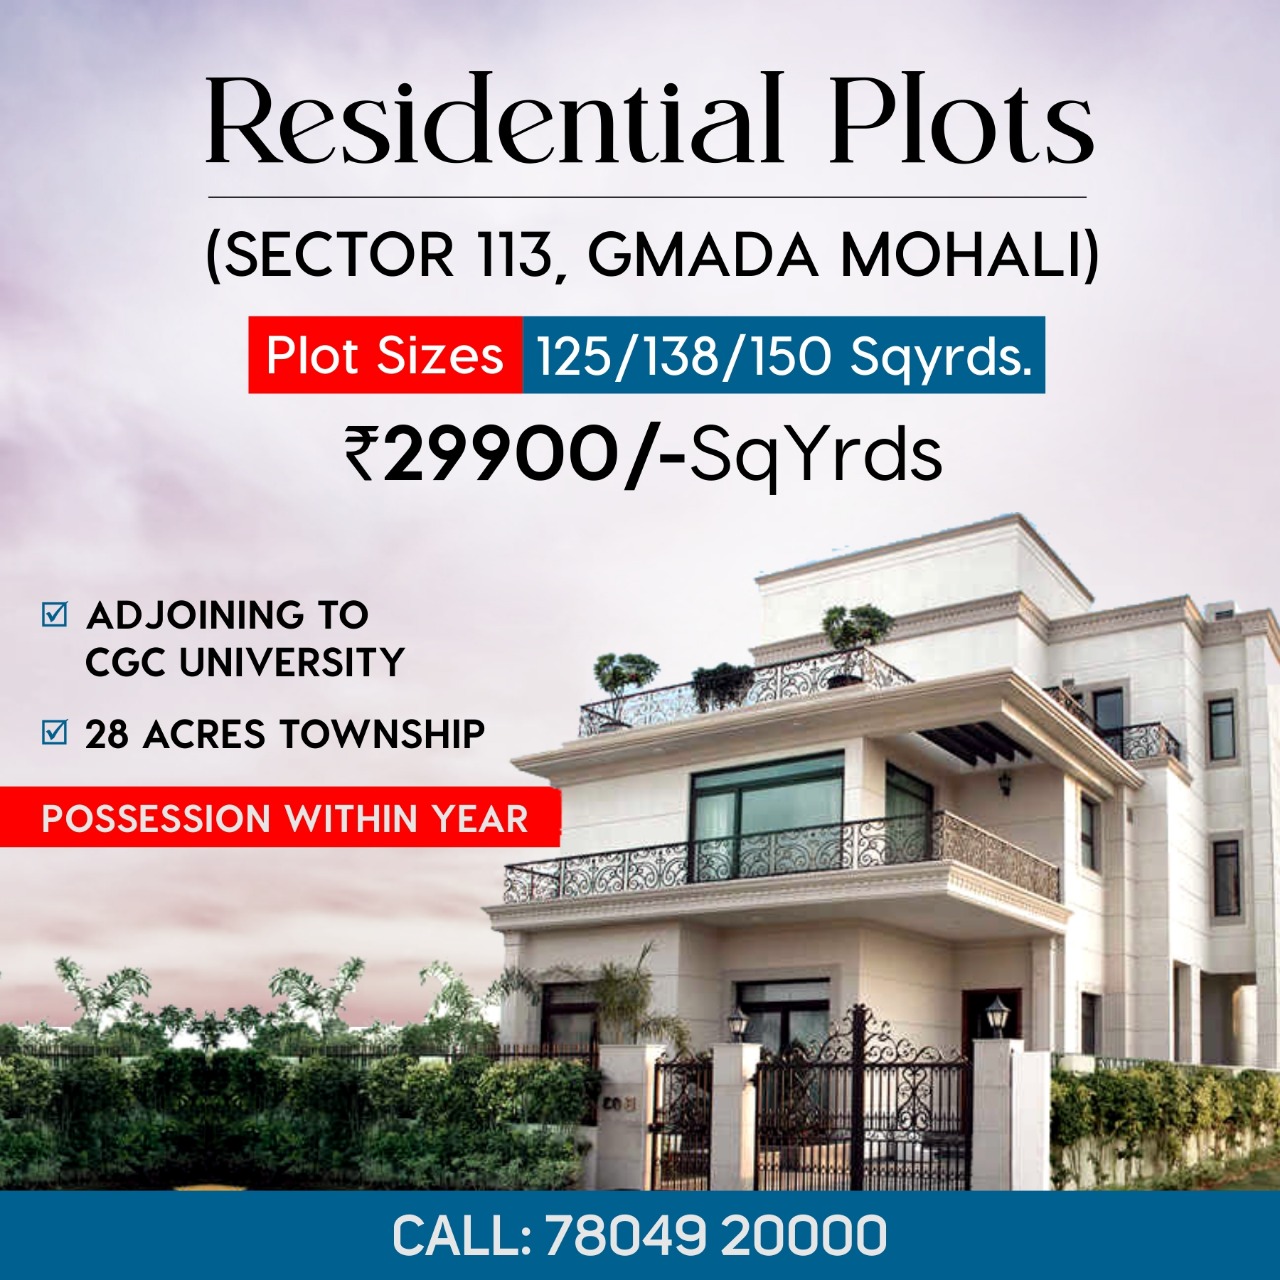 Residential Plots In Sector 113 GMADA Mohali